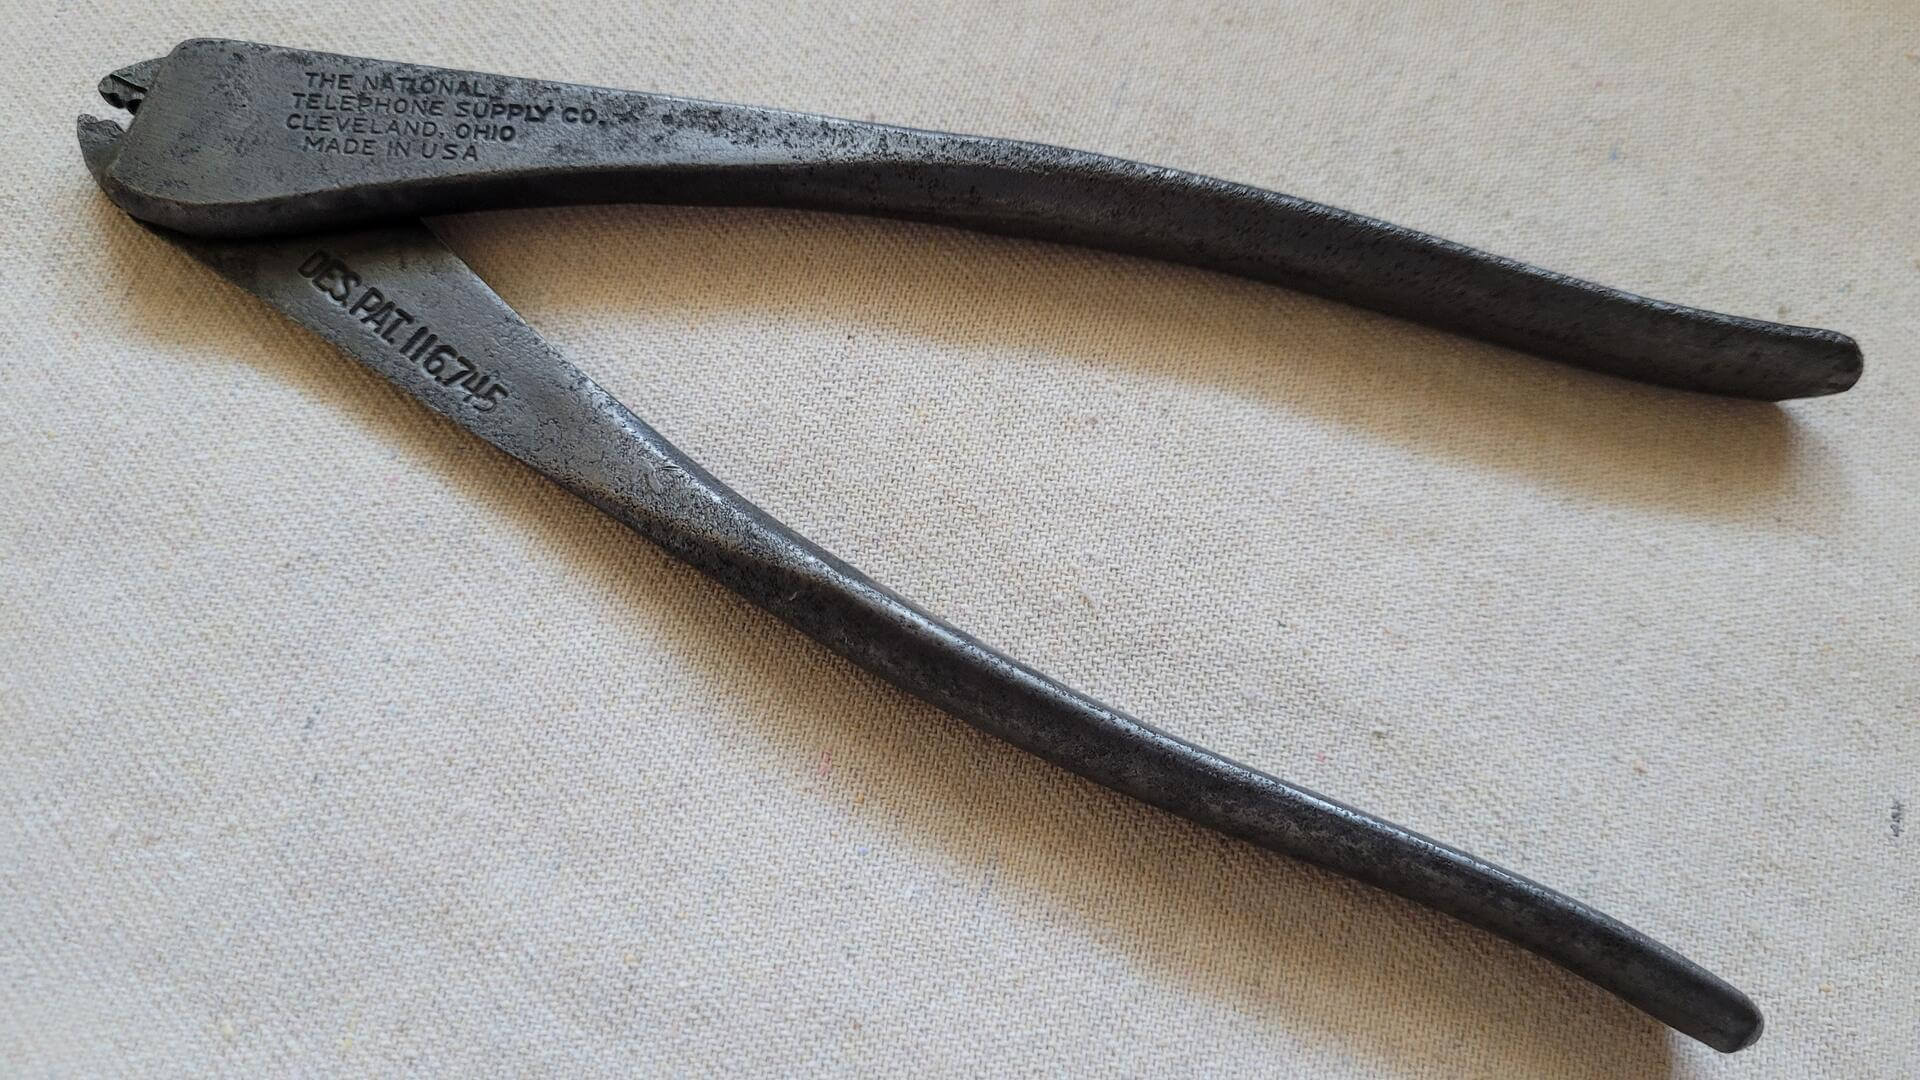 Antique Nicopress 17-BA Swaging Crimping Pliers National Telephone Supply Co Cleveland, Ohio Des. Pat. 116.745 - Antique and Vintage Collectible Made in USA hand tools